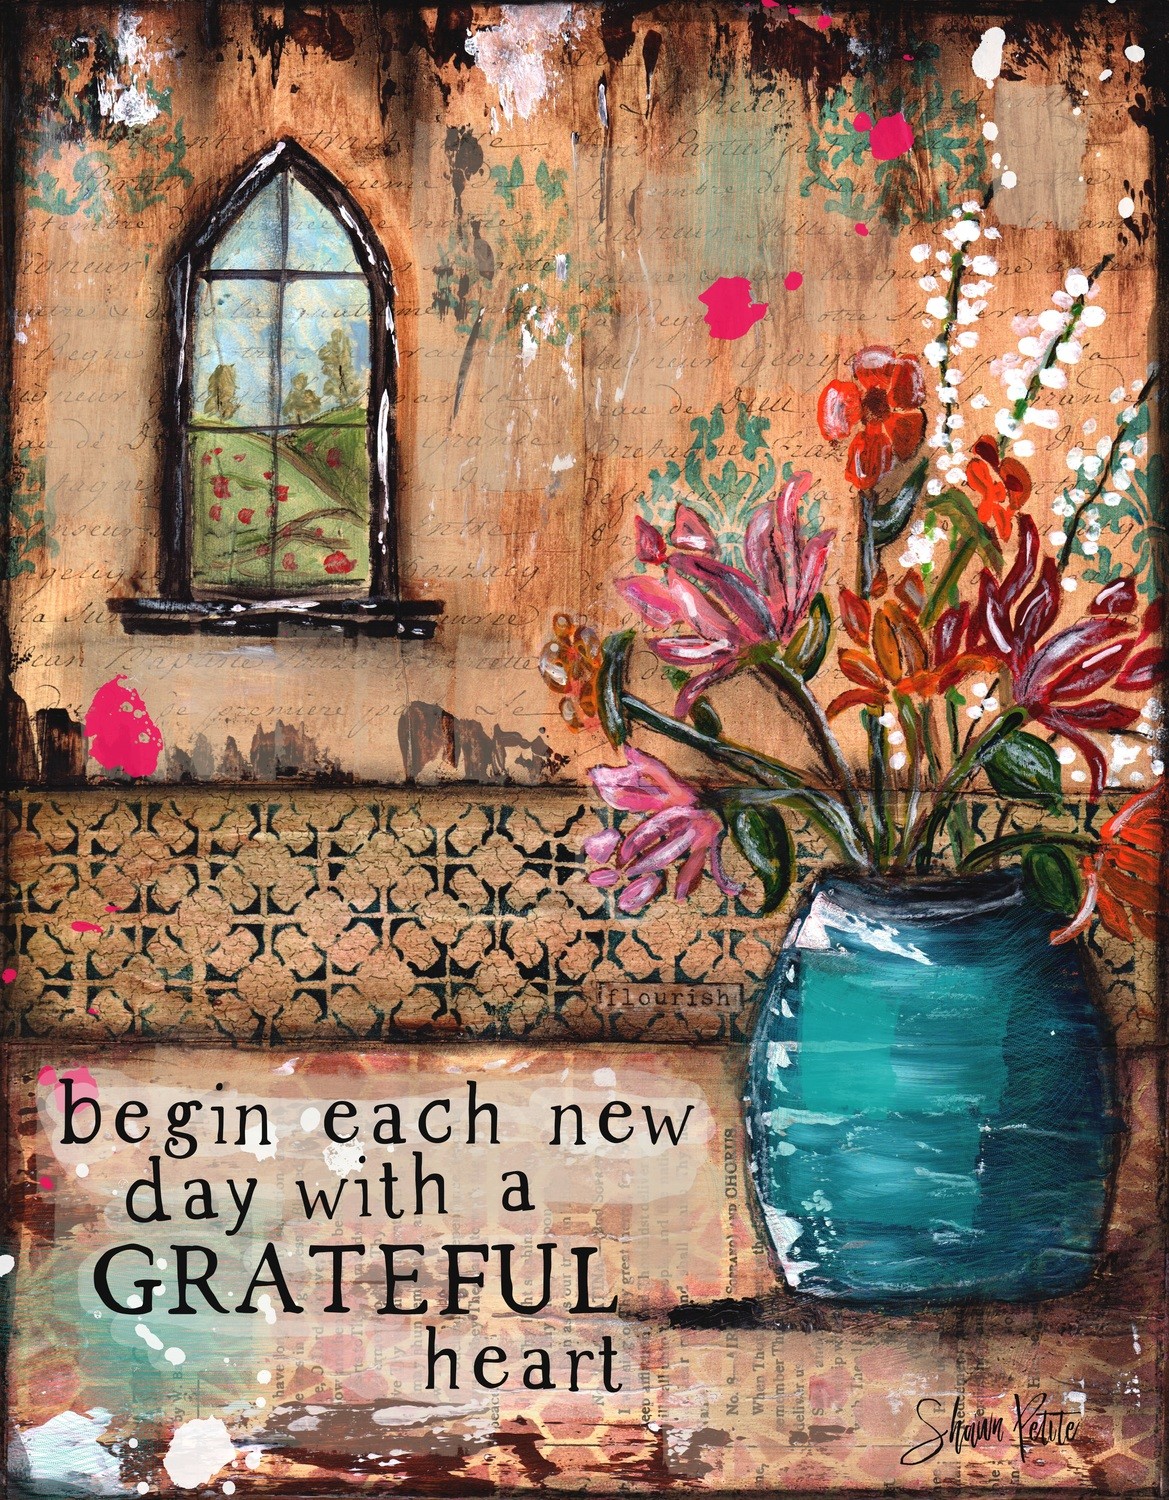 "Begin each day with a Grateful Heart" Print on Wood and Print to be Framed